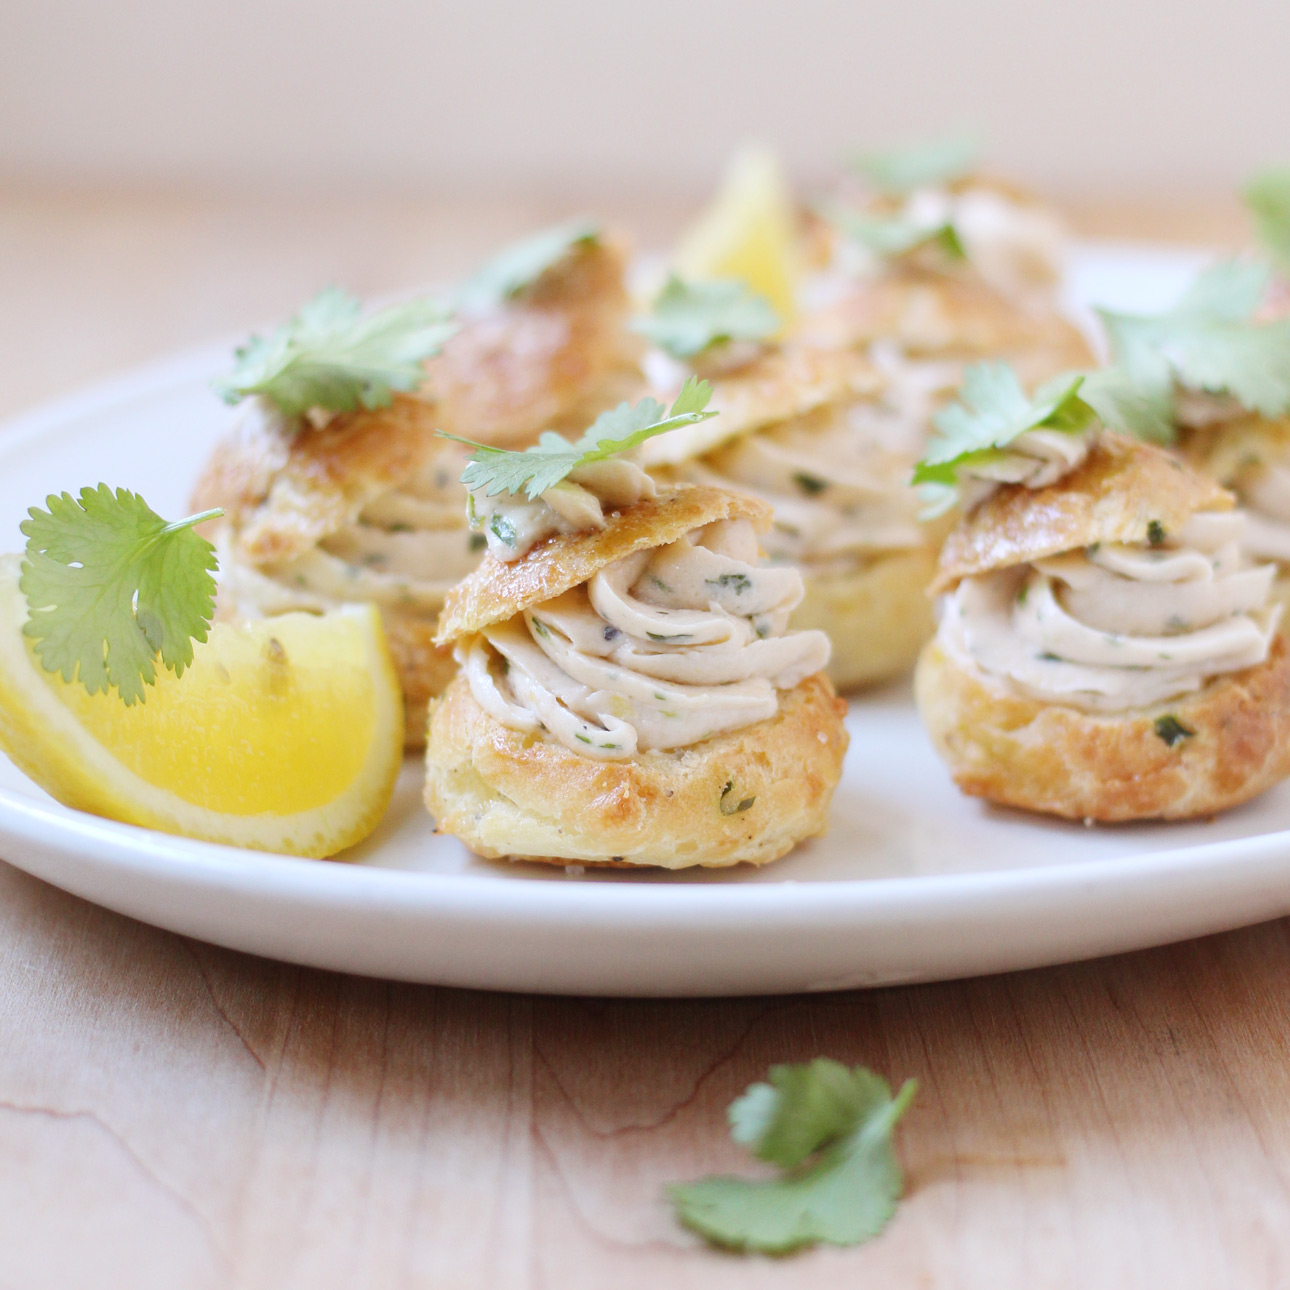 Parmesan Cheese Puffs with Smoked Salmon Mousse // FoodNouveau.com